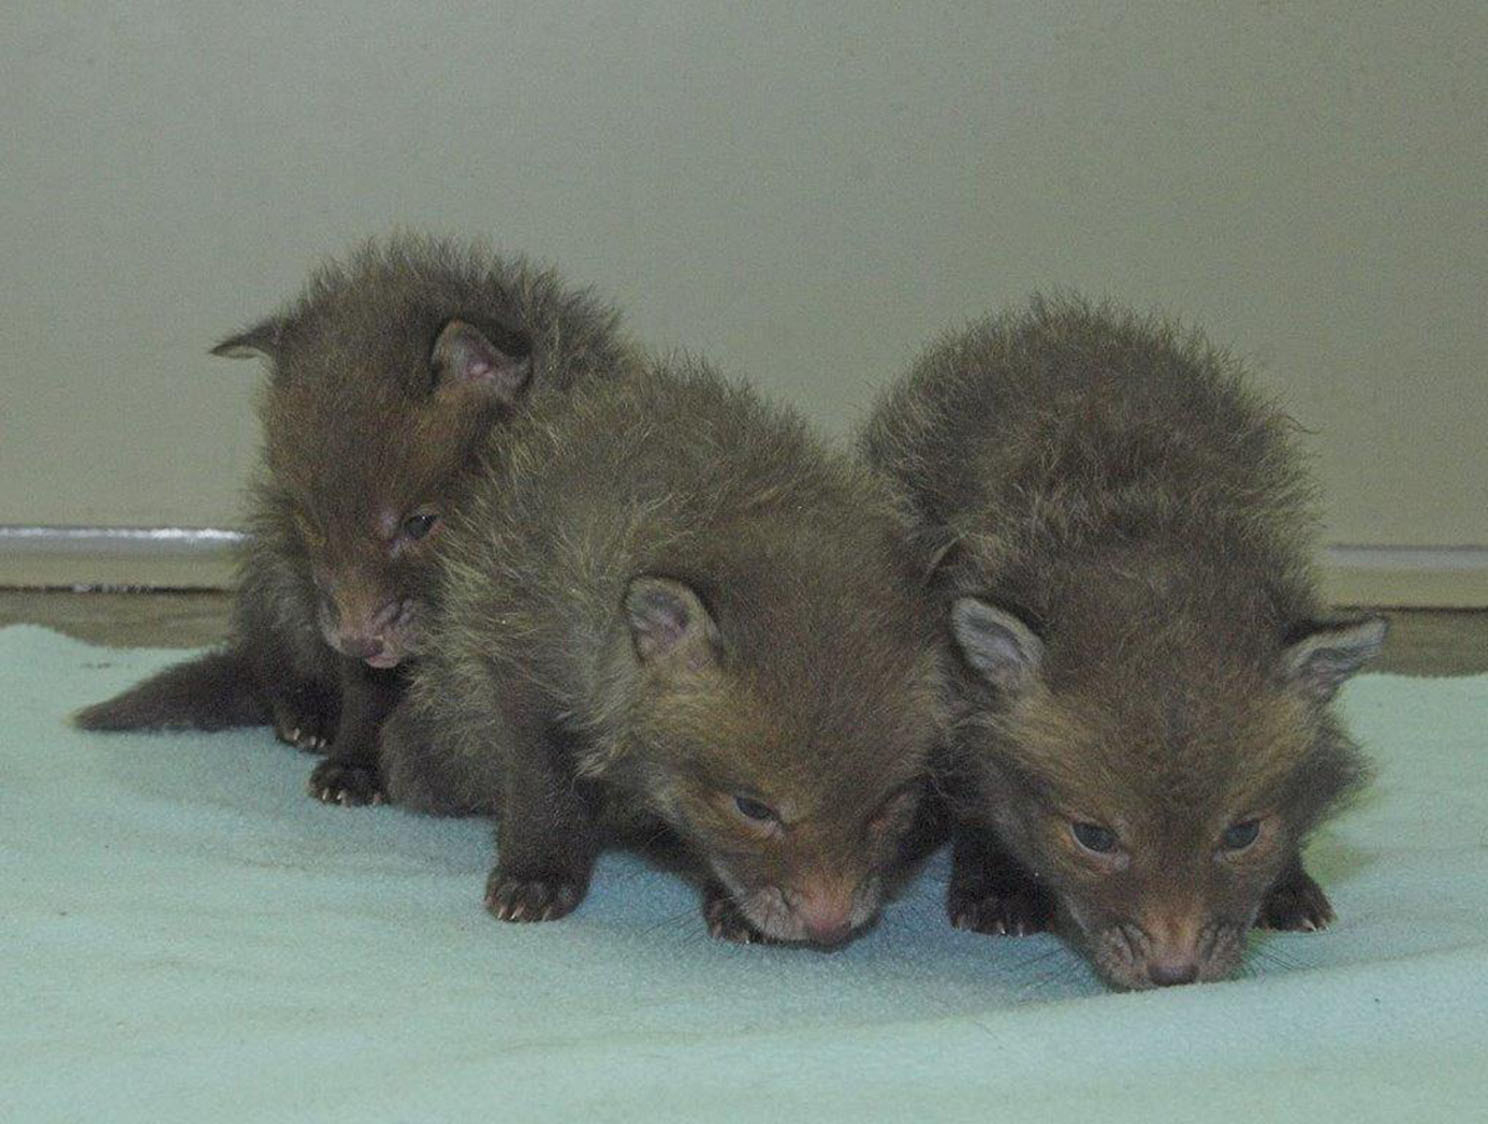 Three fox cubs who were found under rubble by a building site worker in Edinburgh.